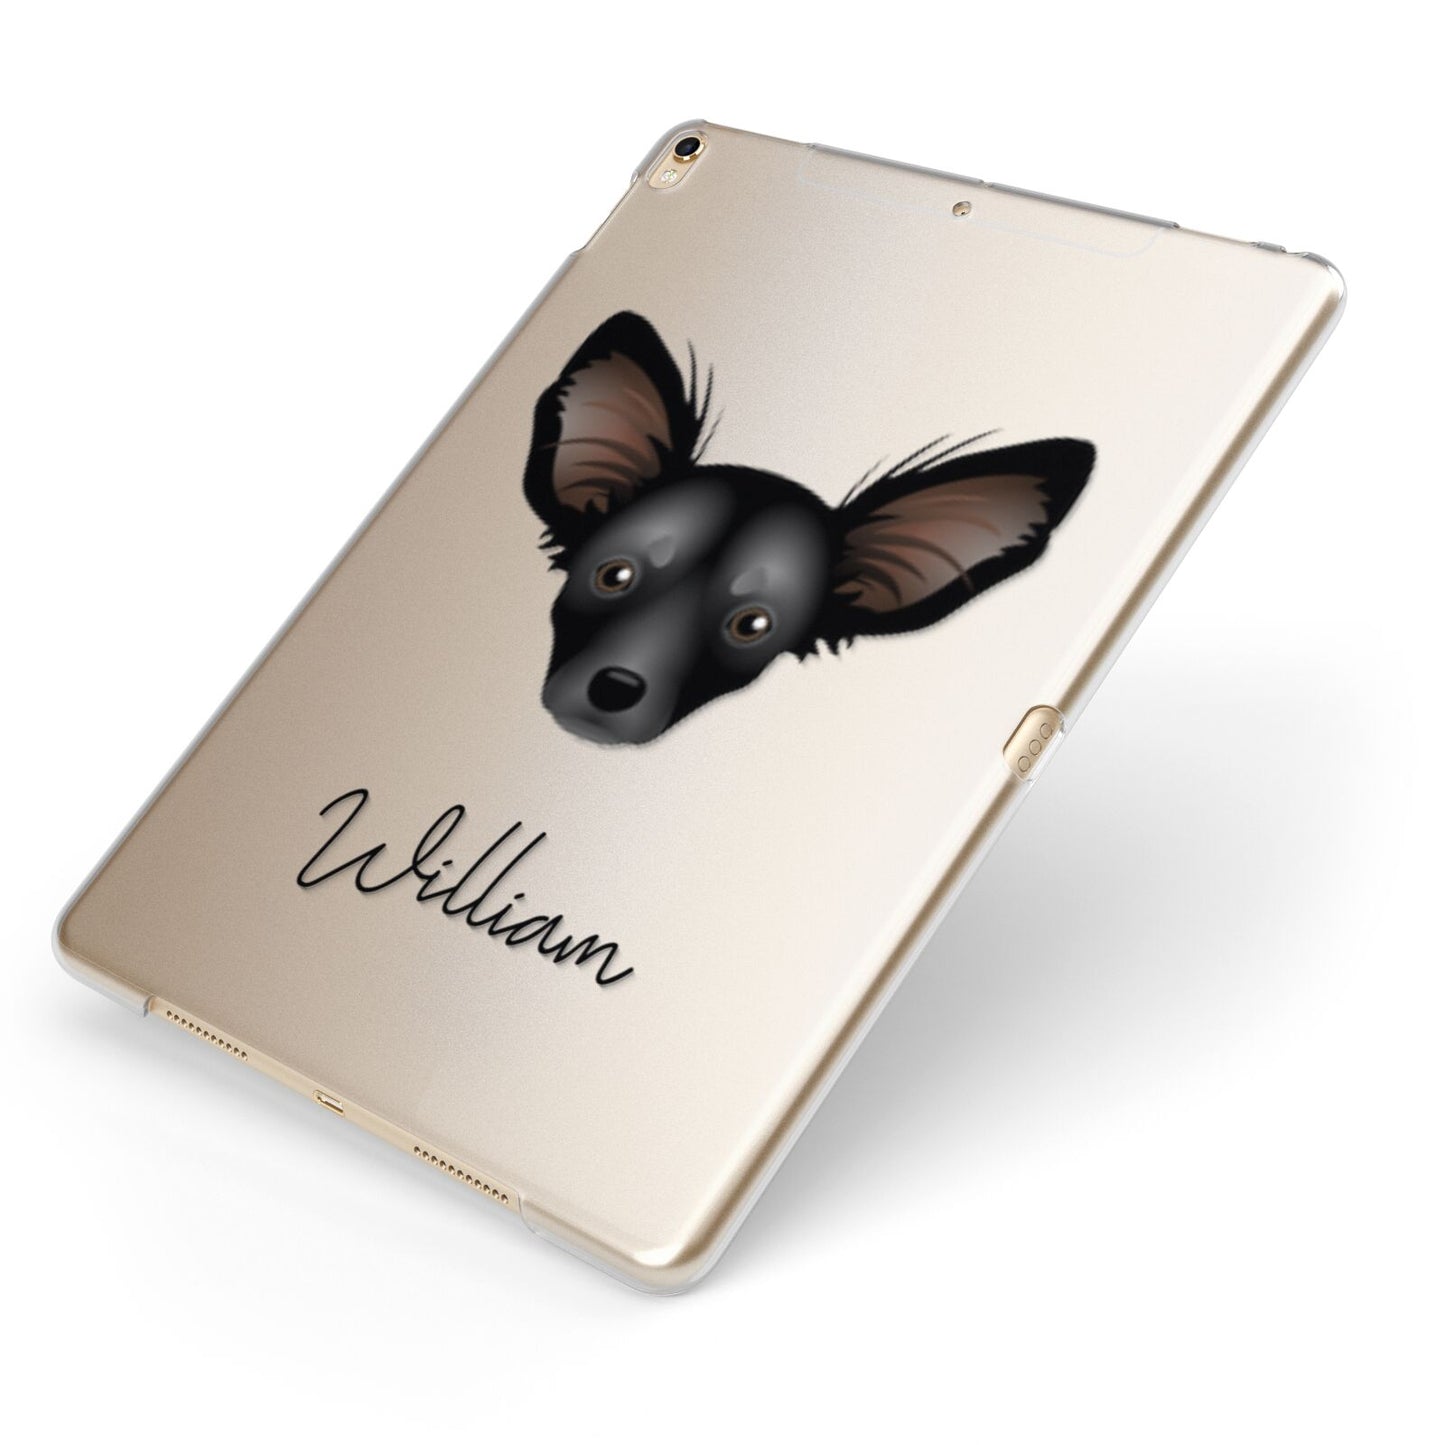 Russian Toy Personalised Apple iPad Case on Gold iPad Side View